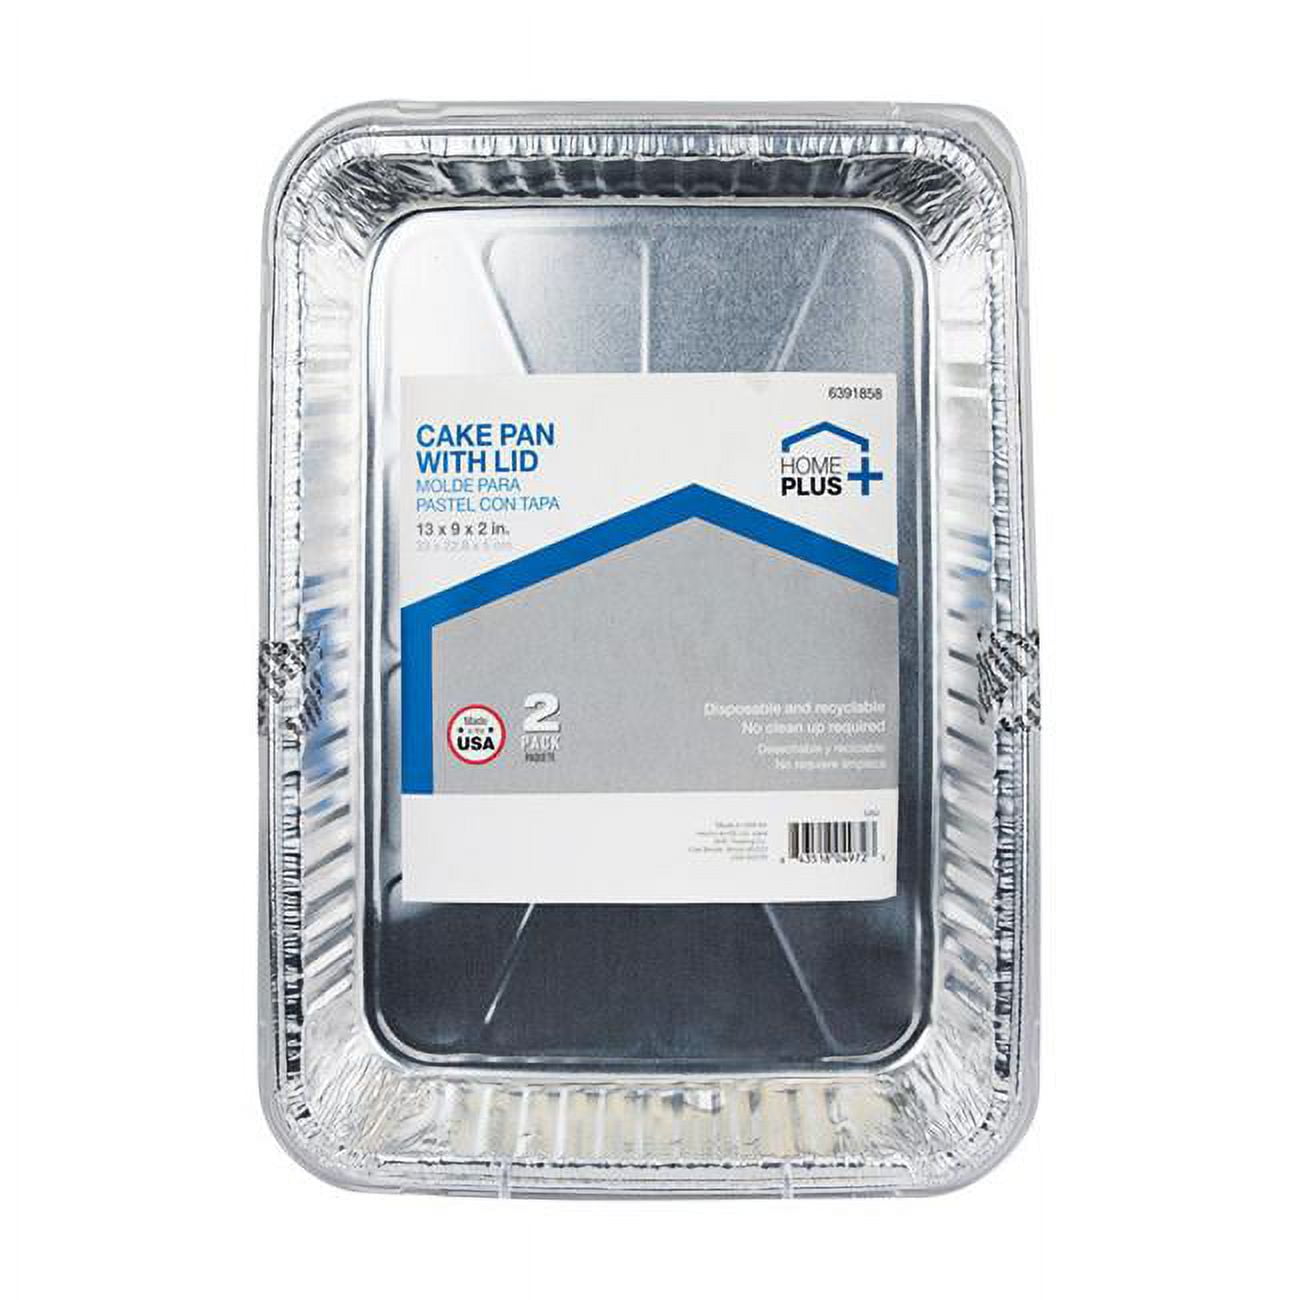 Picture of Home Plus 6391858 9 x 13 in. Durable Foil Cake Pan, Silver - 2 per Pack, Pack of 12